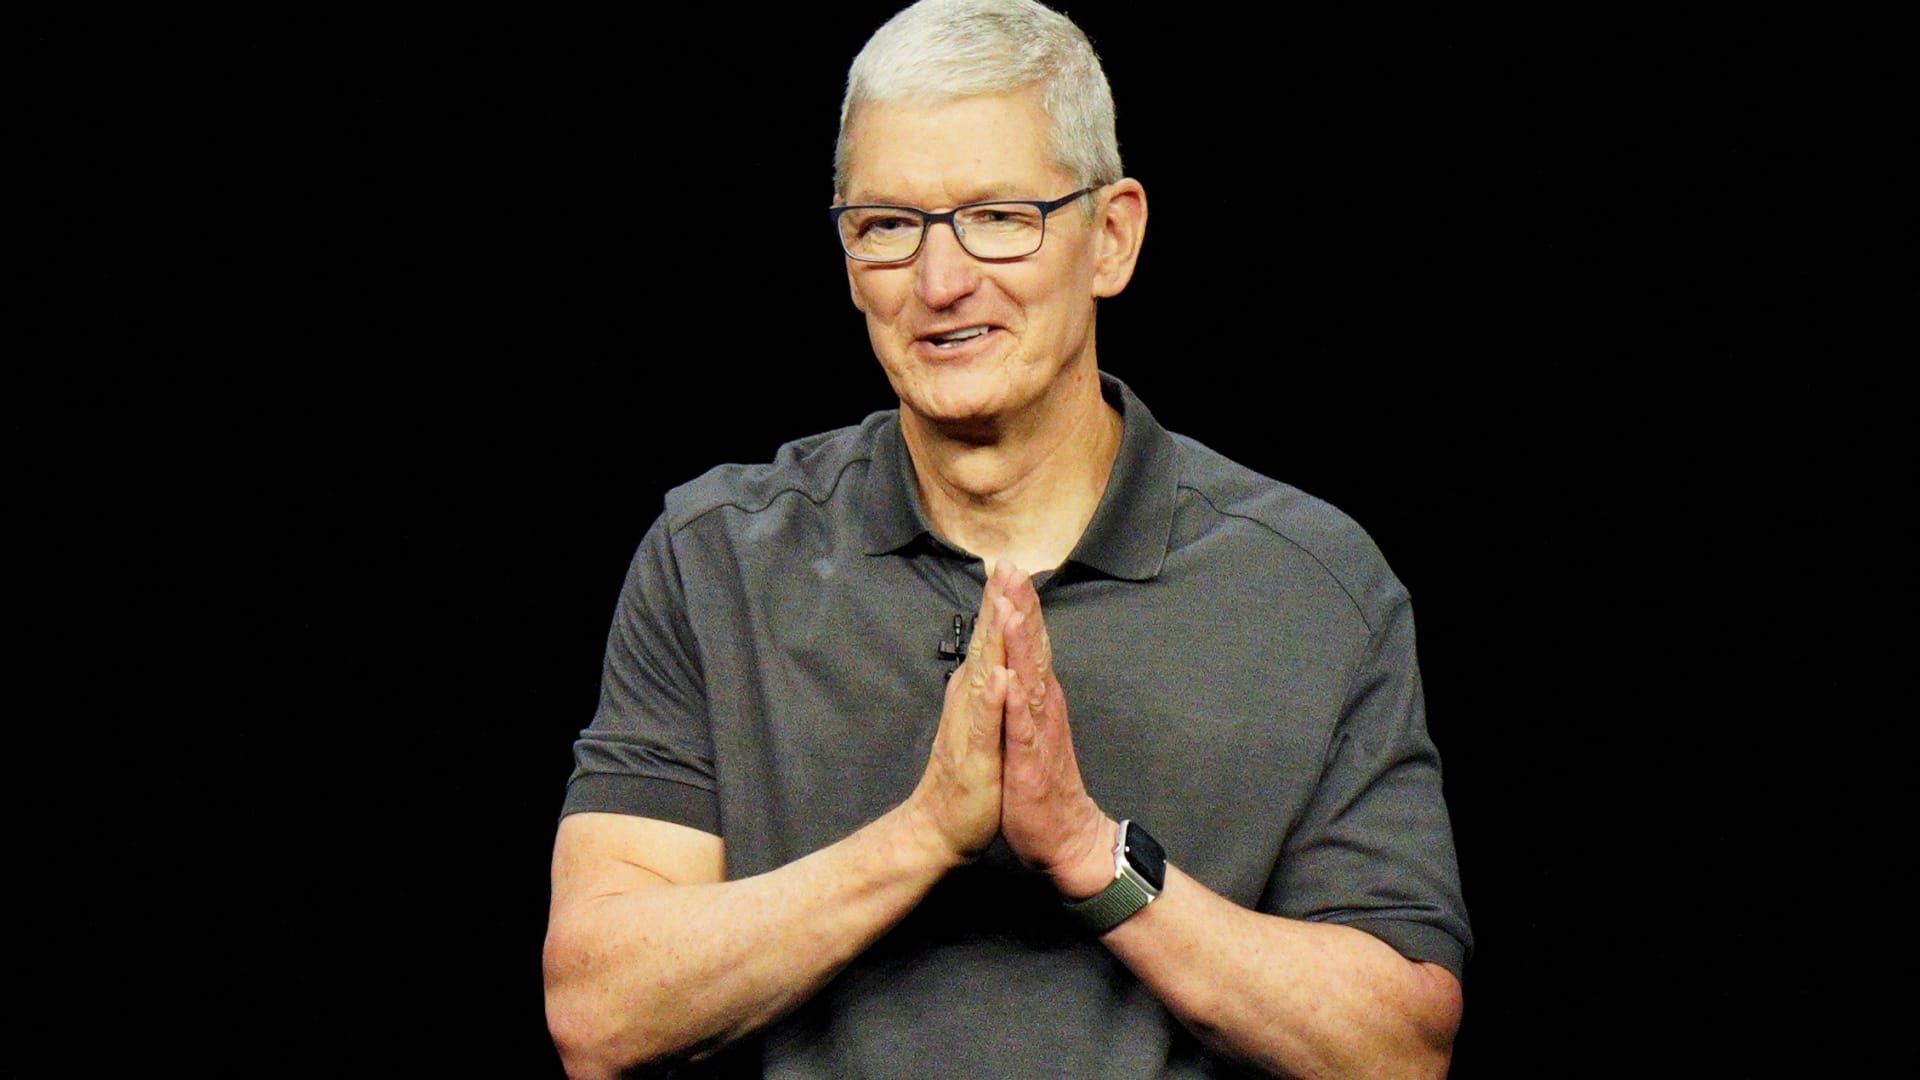 Tim Cook teases Apple AI announcement 'later this year'